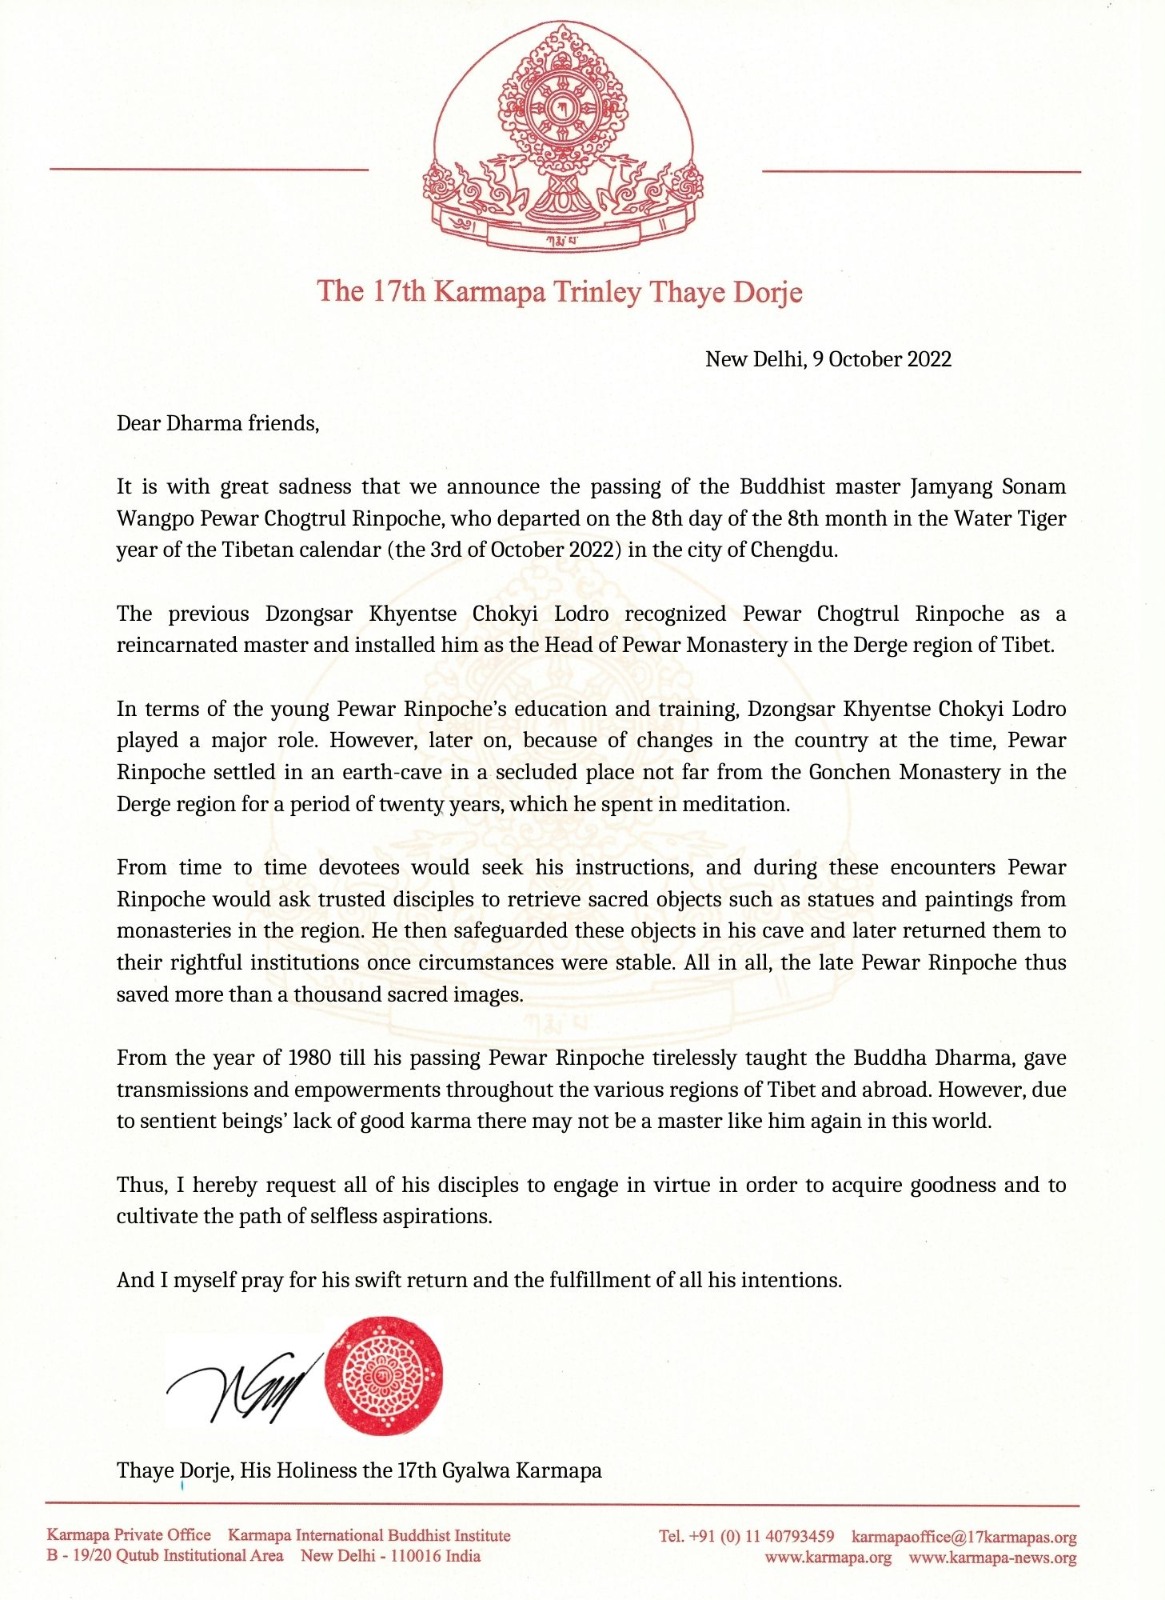 Letter by Karmapa on the passing of Pewar Rinpoche, in English